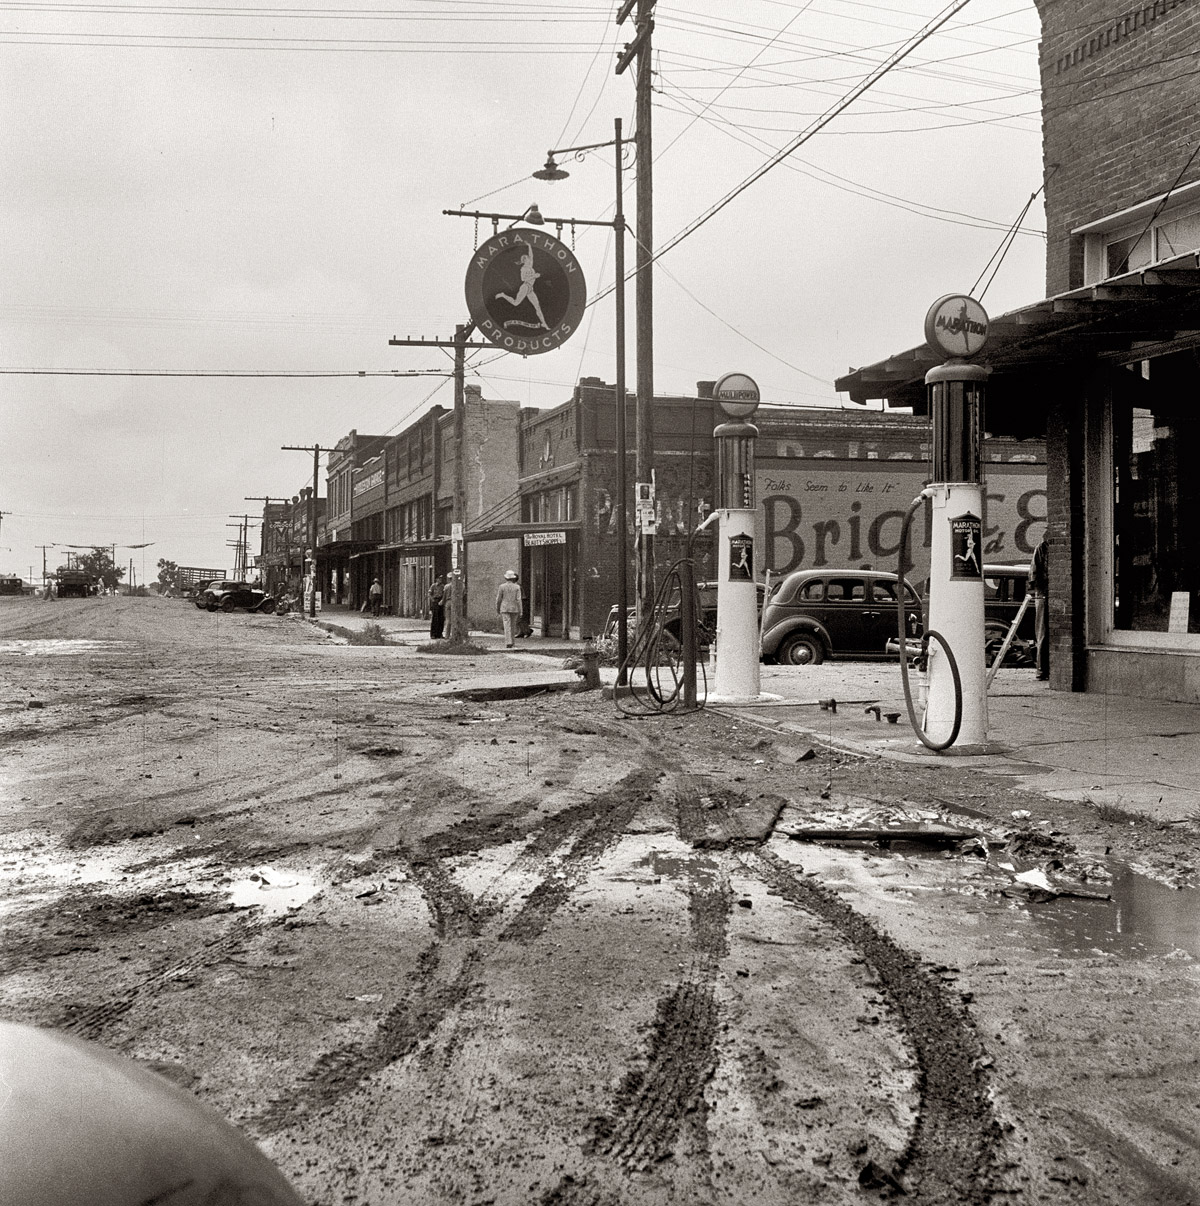 June 1938. Caddo, Oklahoma. Migrants leave the small towns as well as the farms of the southwest. This region is a source of many emigrants to the Pacific Coast. View full size. Photograph by Dorothea Lange.